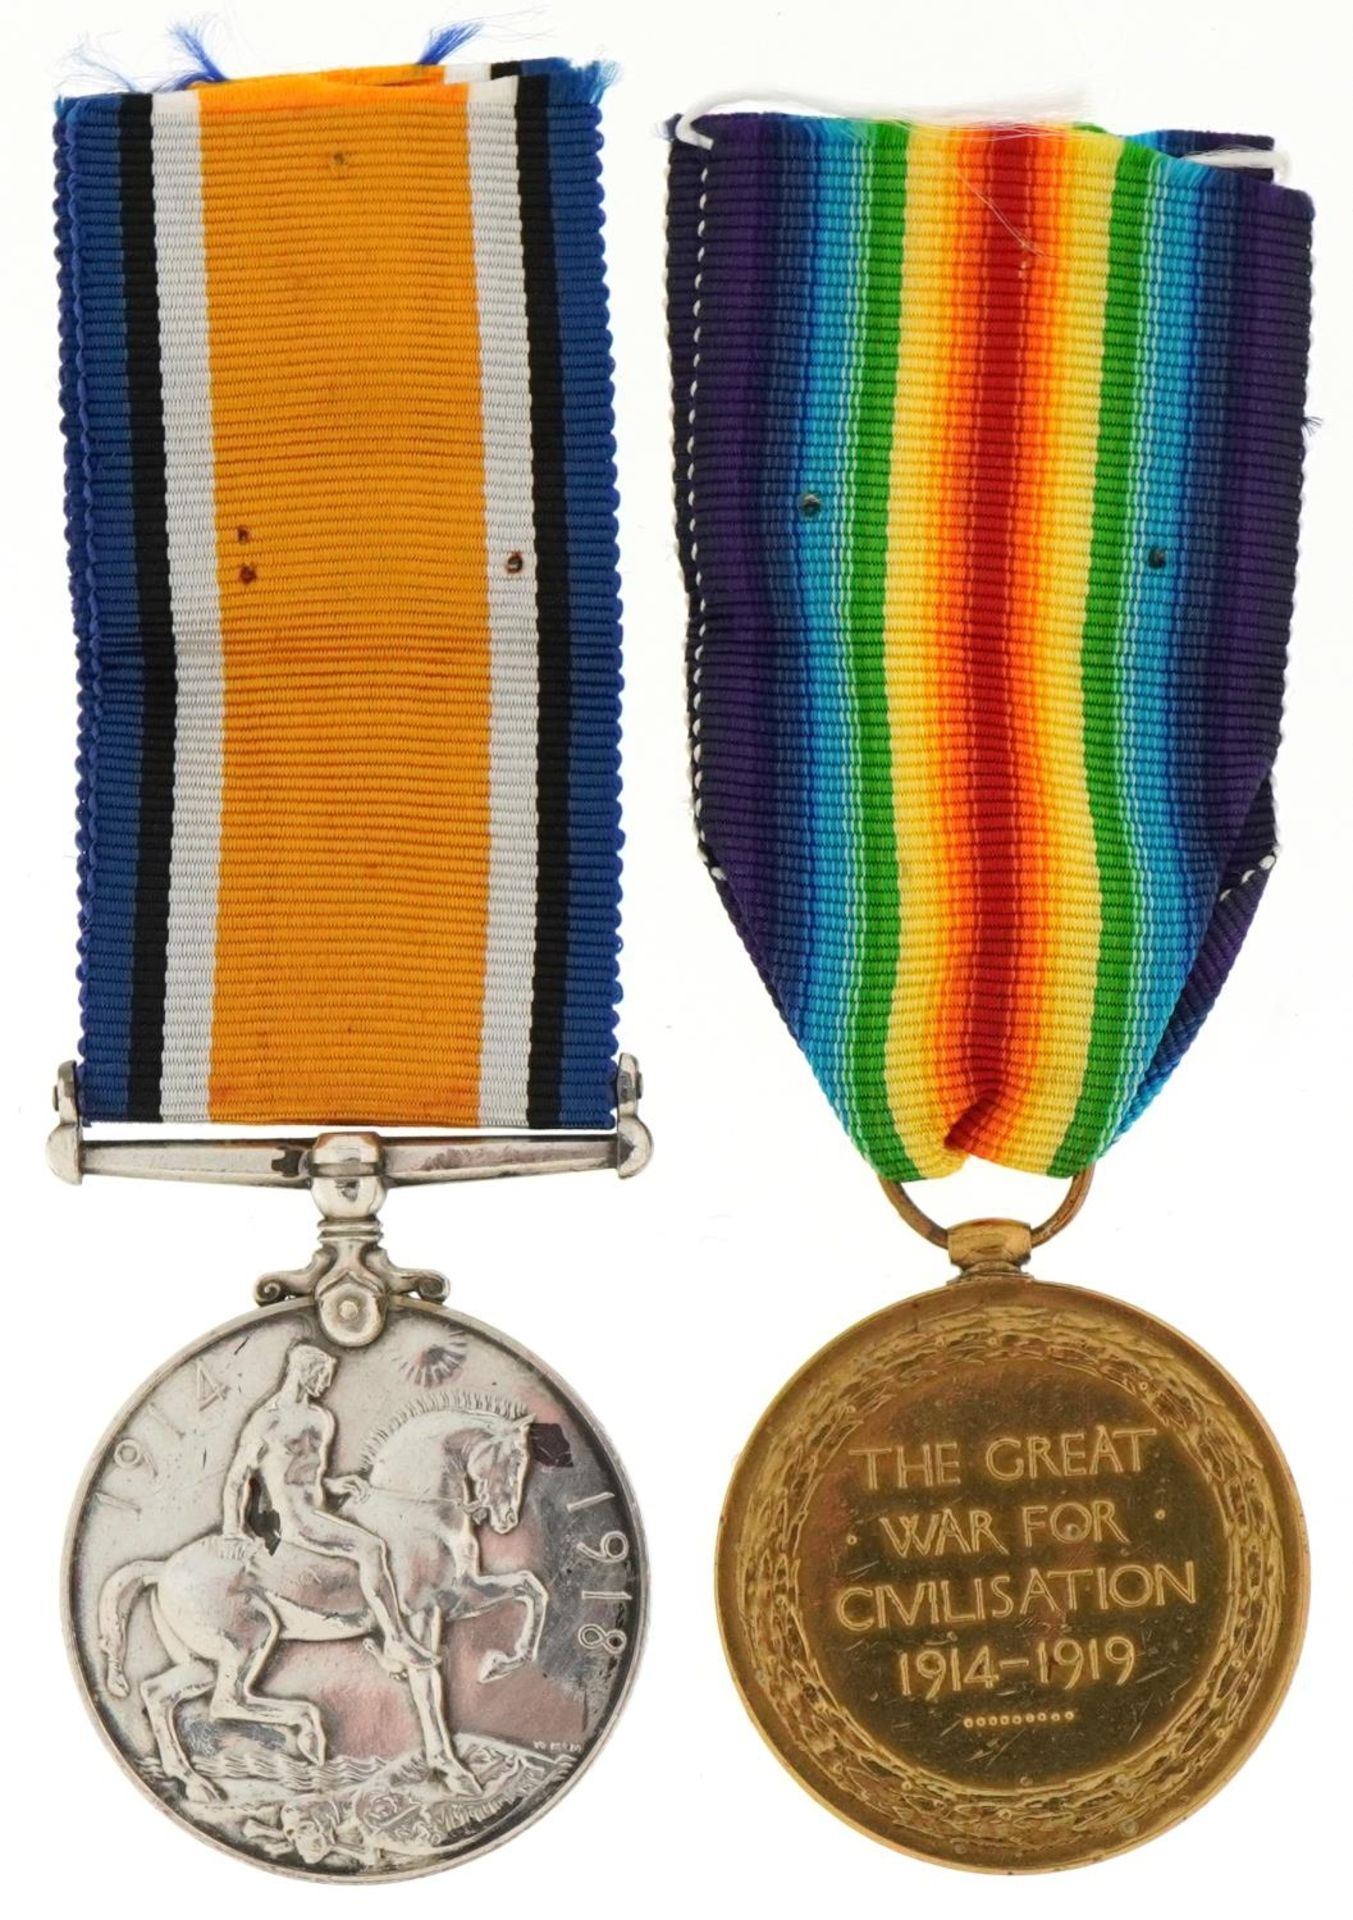 British military World War I medals awarded to PTE J.C.TIPPER K.O.Y.L.D. and SJT A.WILKS ACC - Image 3 of 9